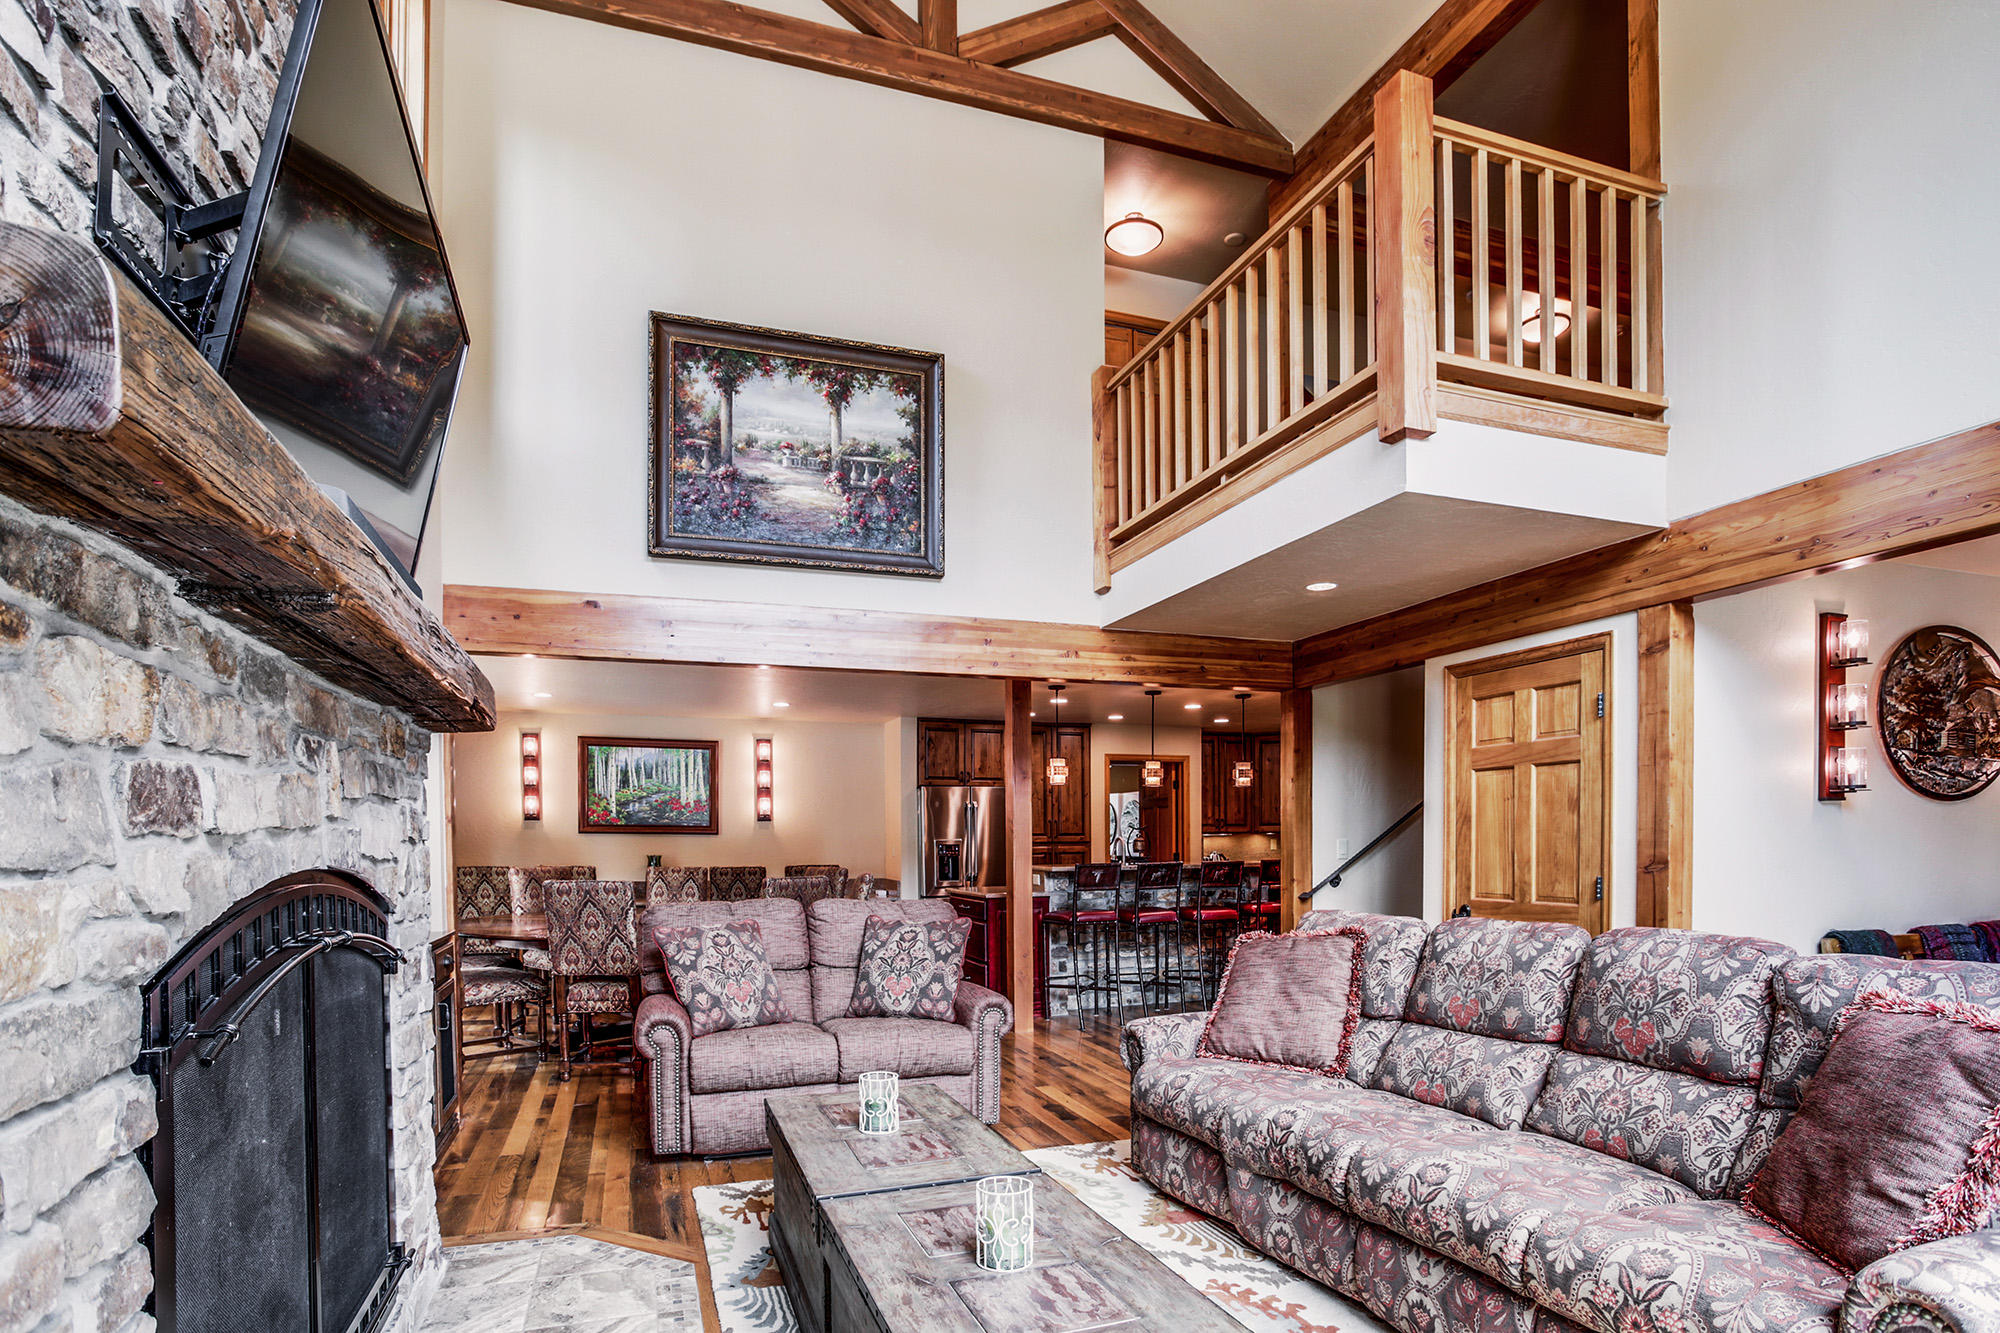 Living area overlooking dining & kitchen areas - Friendly Fox Chalet - Breckenridge vacation rental